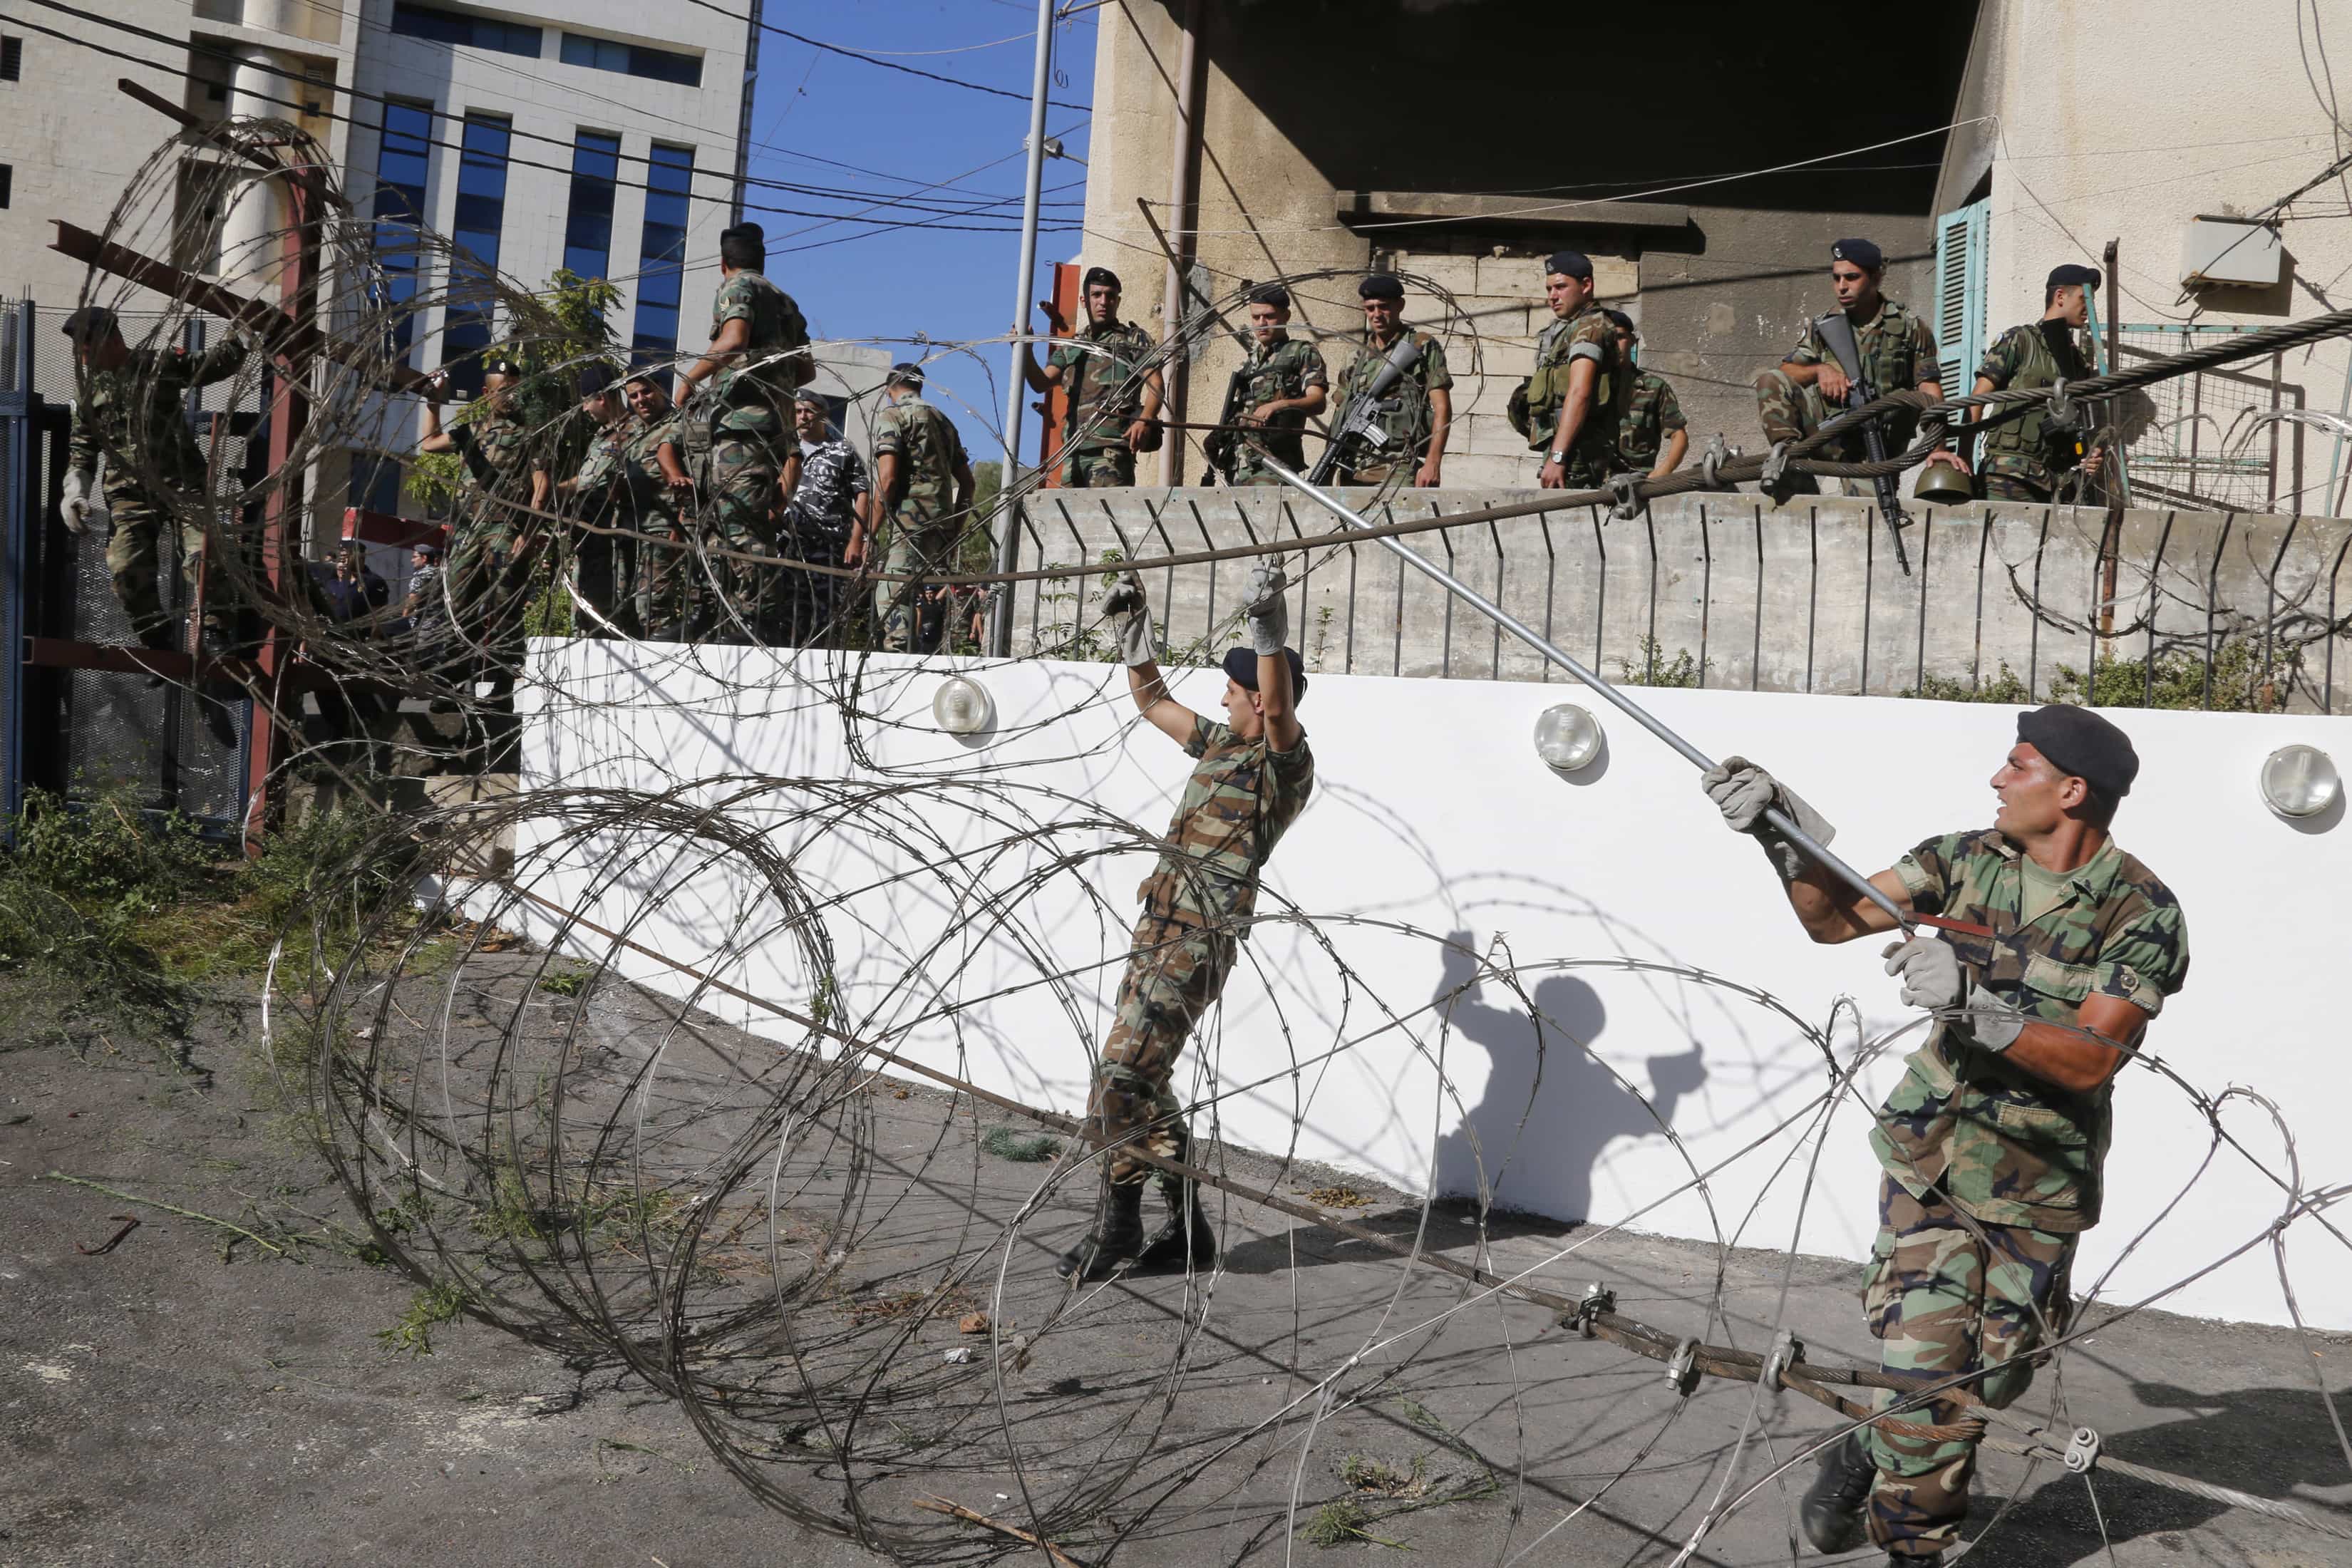 Lebanese army soldiers install barbed wire to close a road leading to the U.S. embassy in Awkar, north of Beirut, before a protest against potential U.S. strikes on Syria, September 6, 2013, REUTERS/Mohamed Azakir